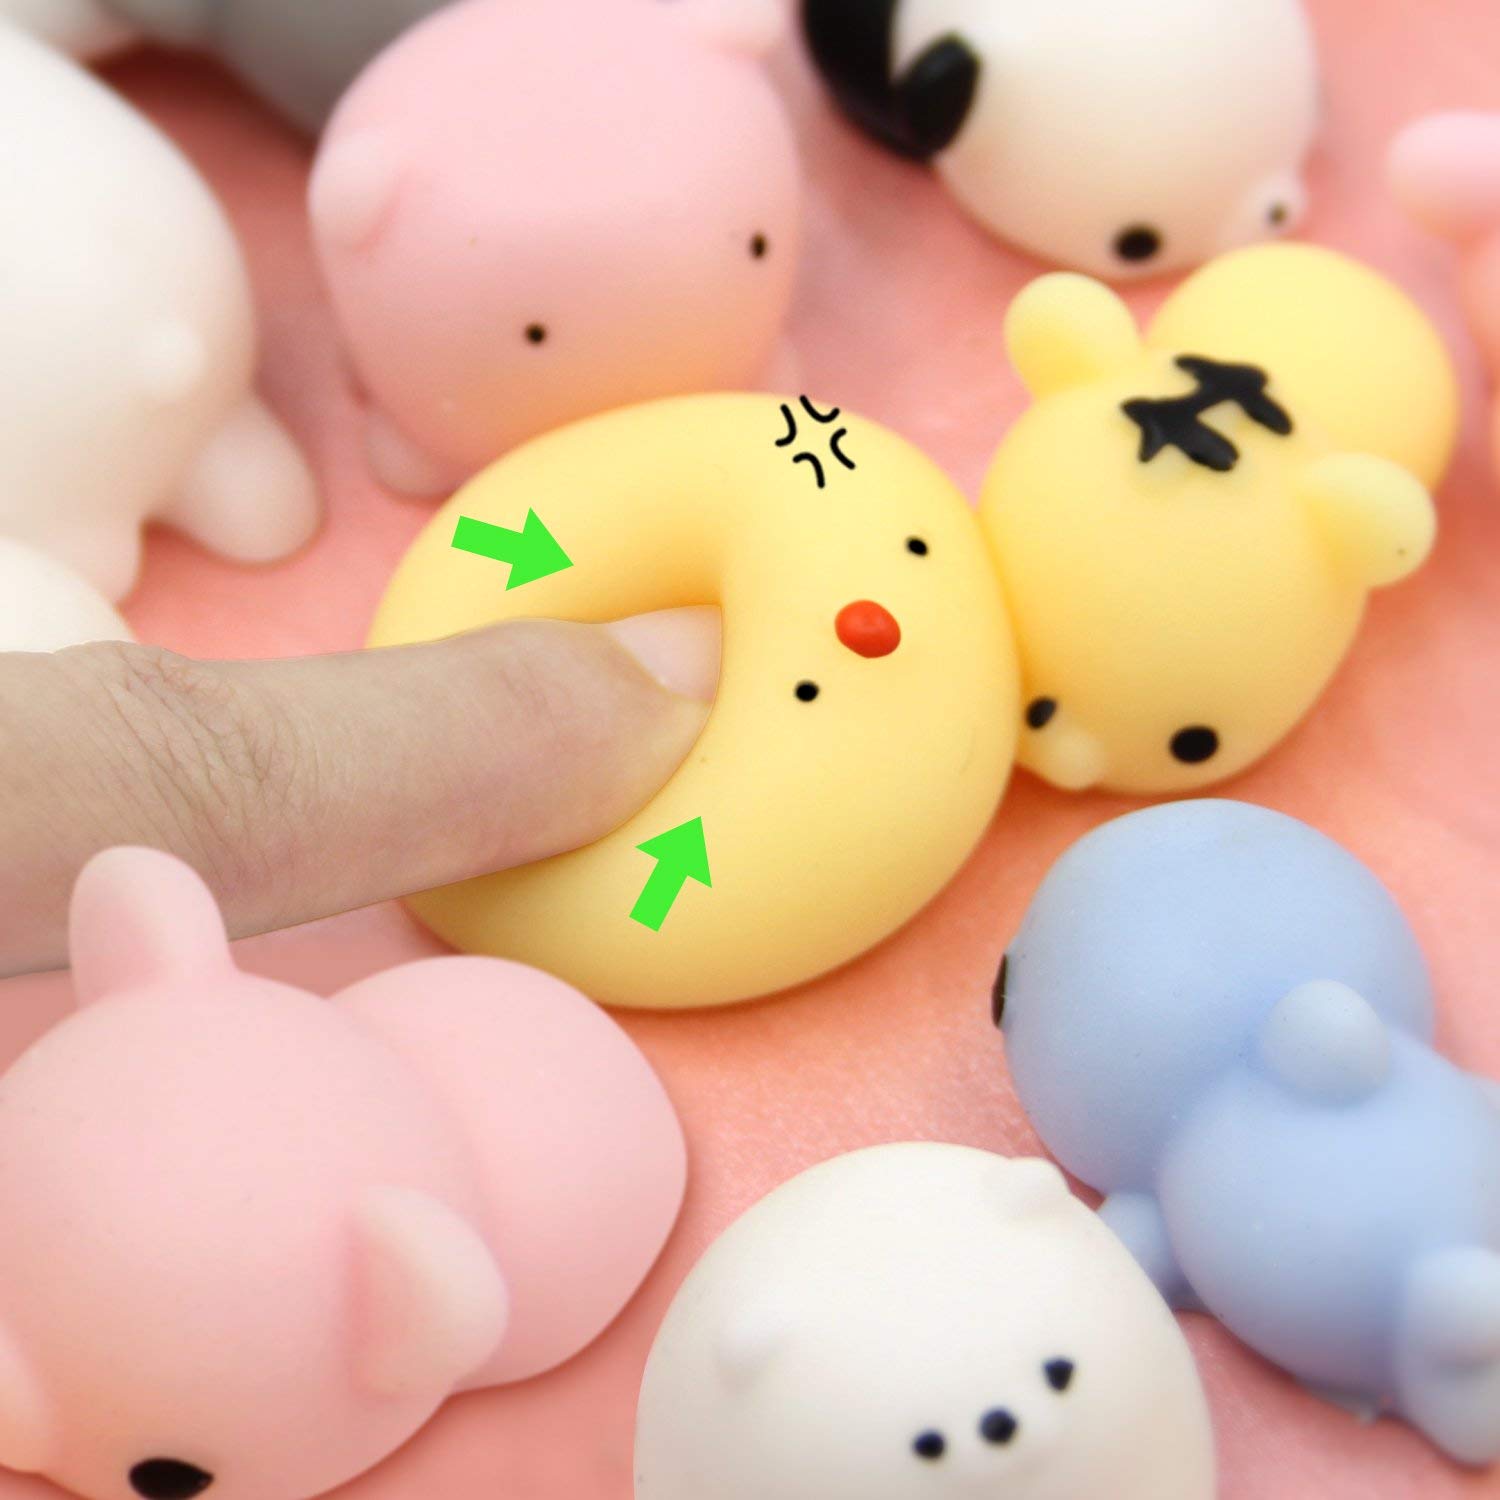 Satkago Squishies Mini Mochi Squishies Toy, 25 Pcs Mini Squishys Toys Cute Stress Reliever Toys Funny Fidget Toys Birthday Gift Party Favors for Kids